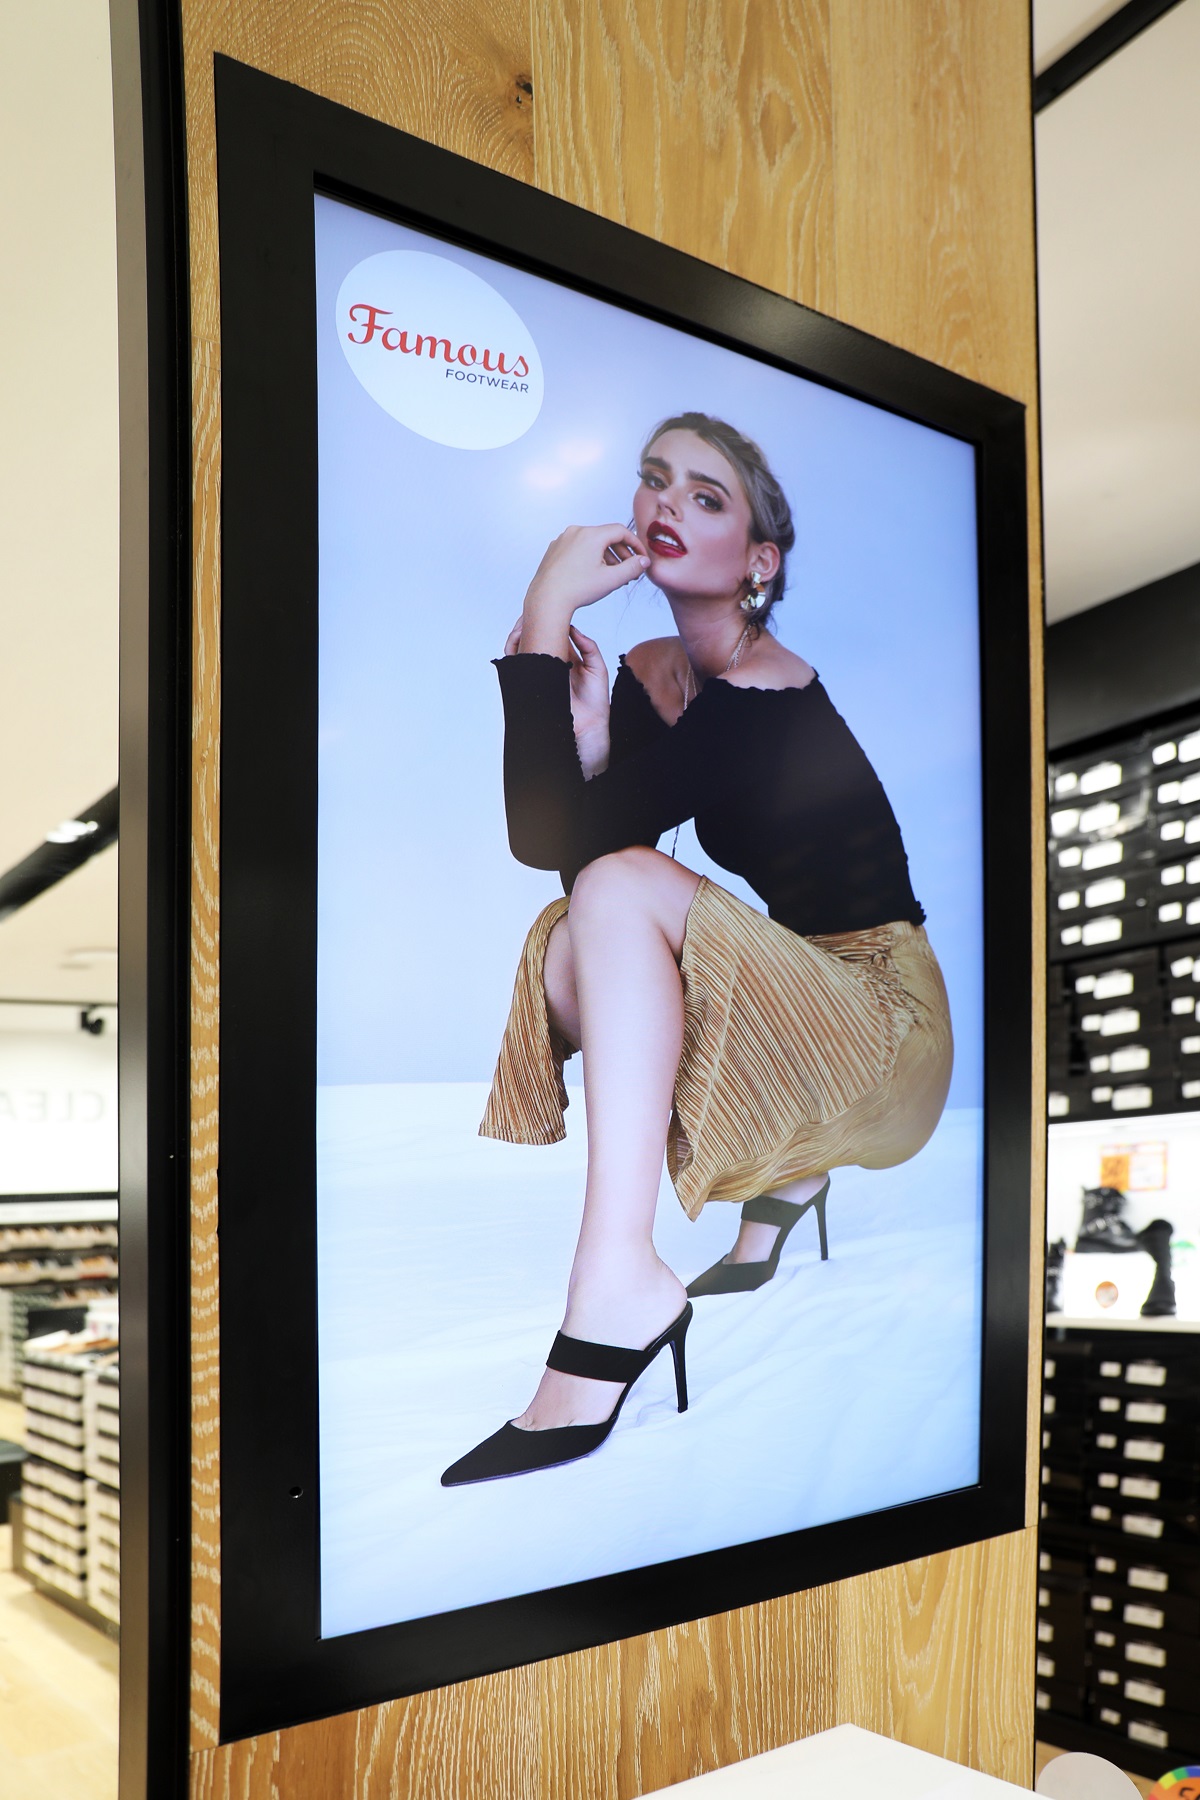 Masterplanners-Famous Footwear-Signage Display